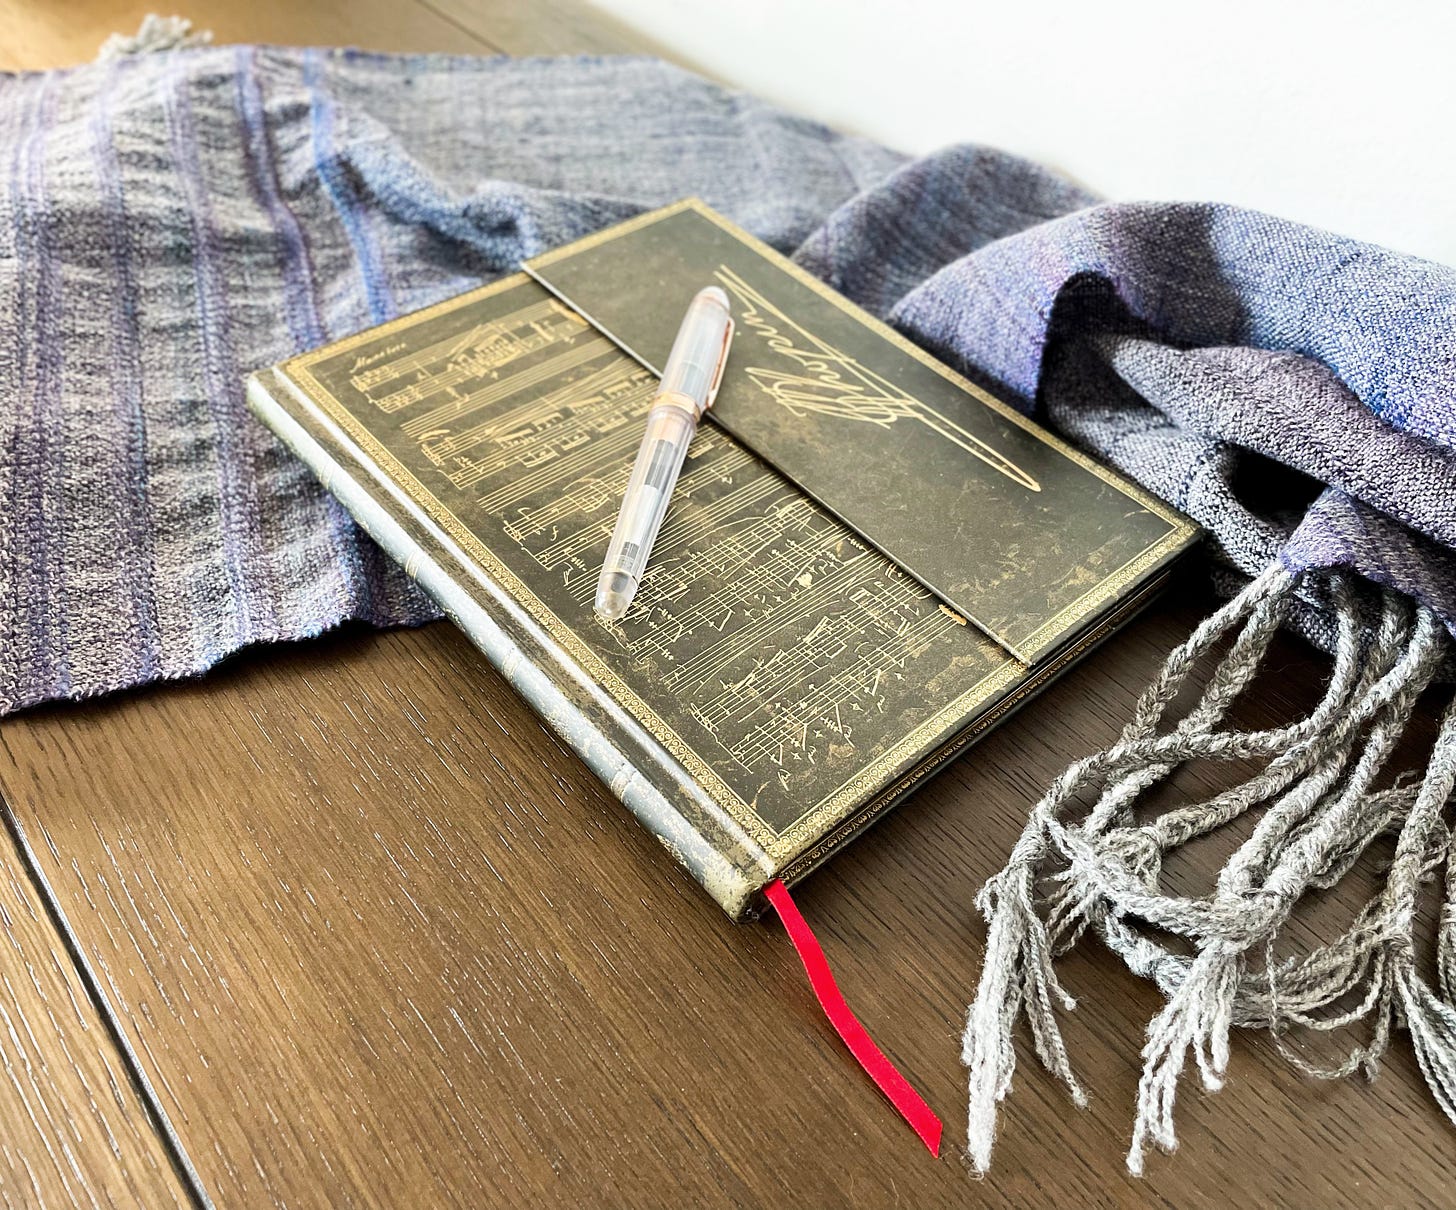 A notebook with music notes on it, a pen sitting on top of it, and a blue shawl around it. All on a brown surface.